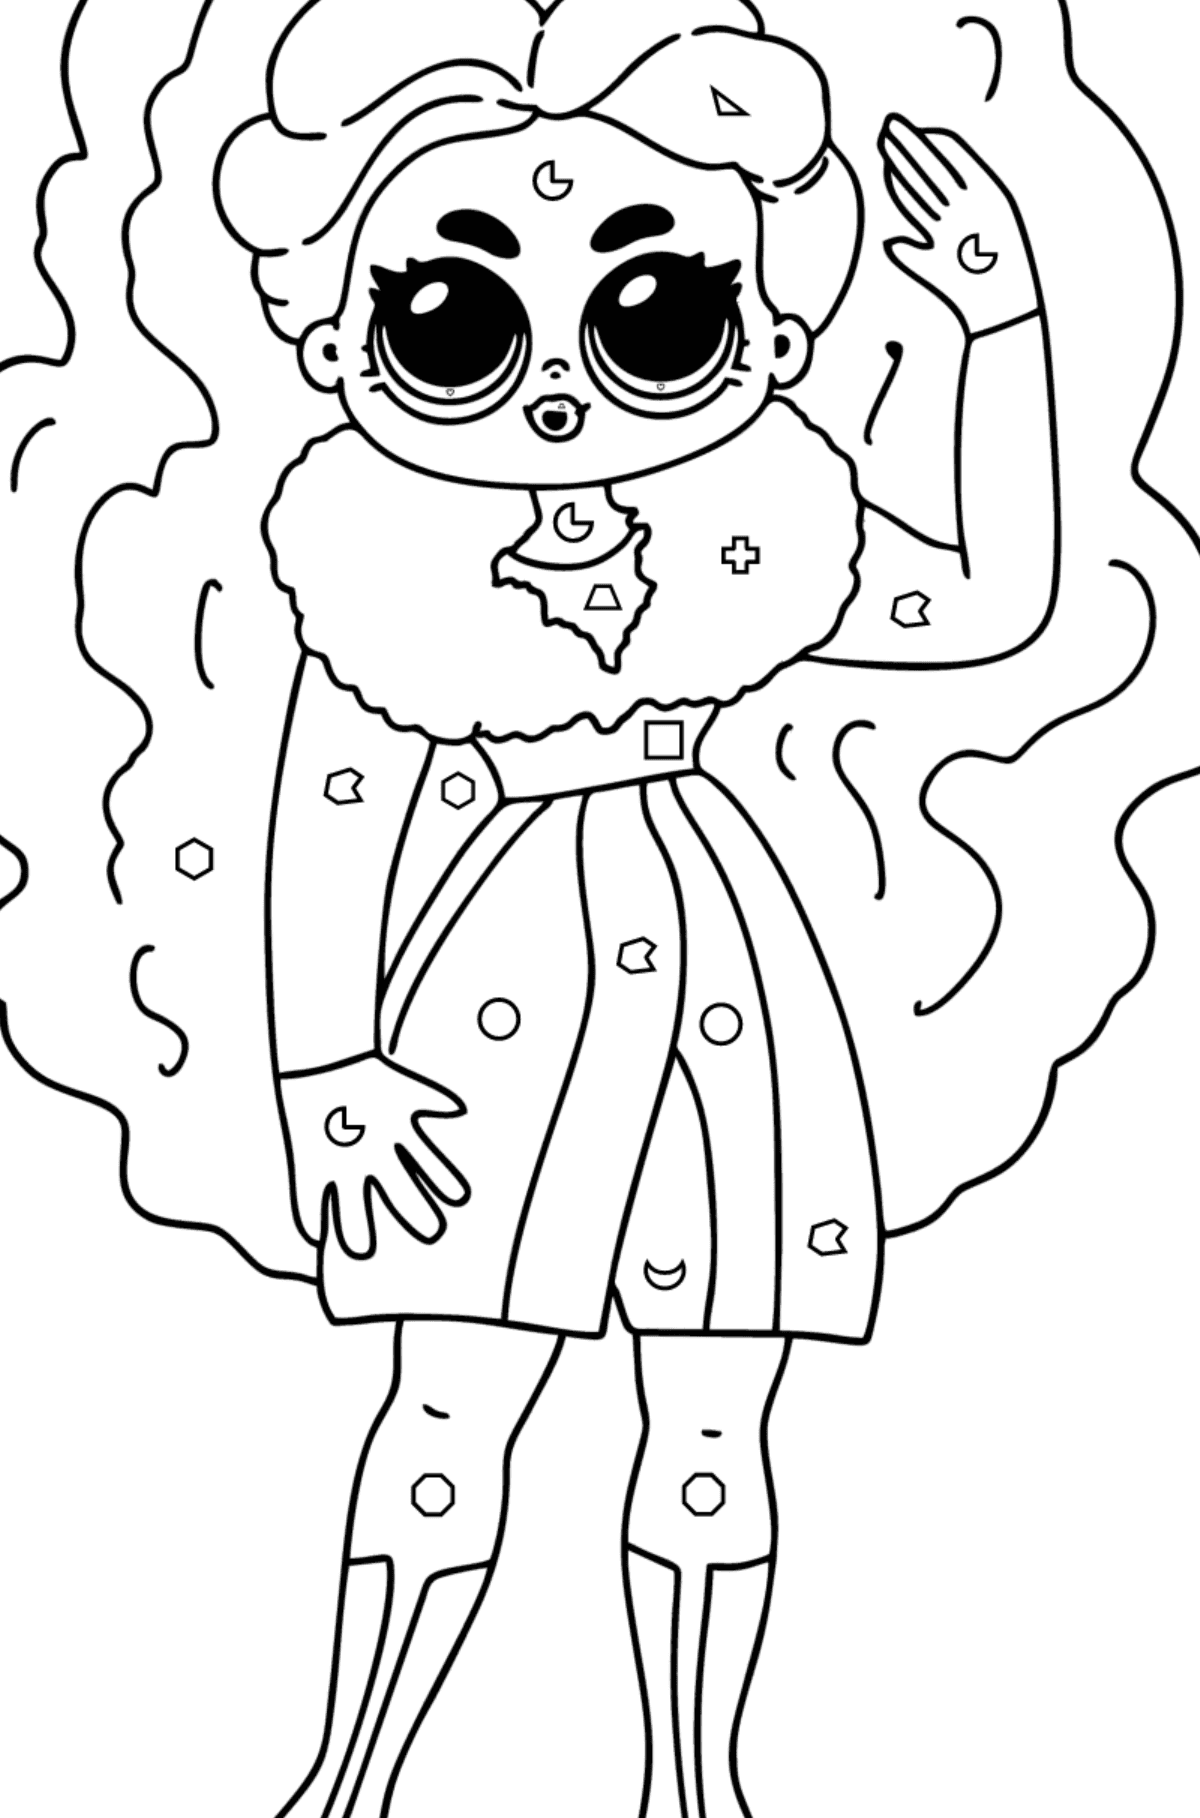 Coloring page LOL OMG Cute Girl - Coloring by Geometric Shapes for Kids